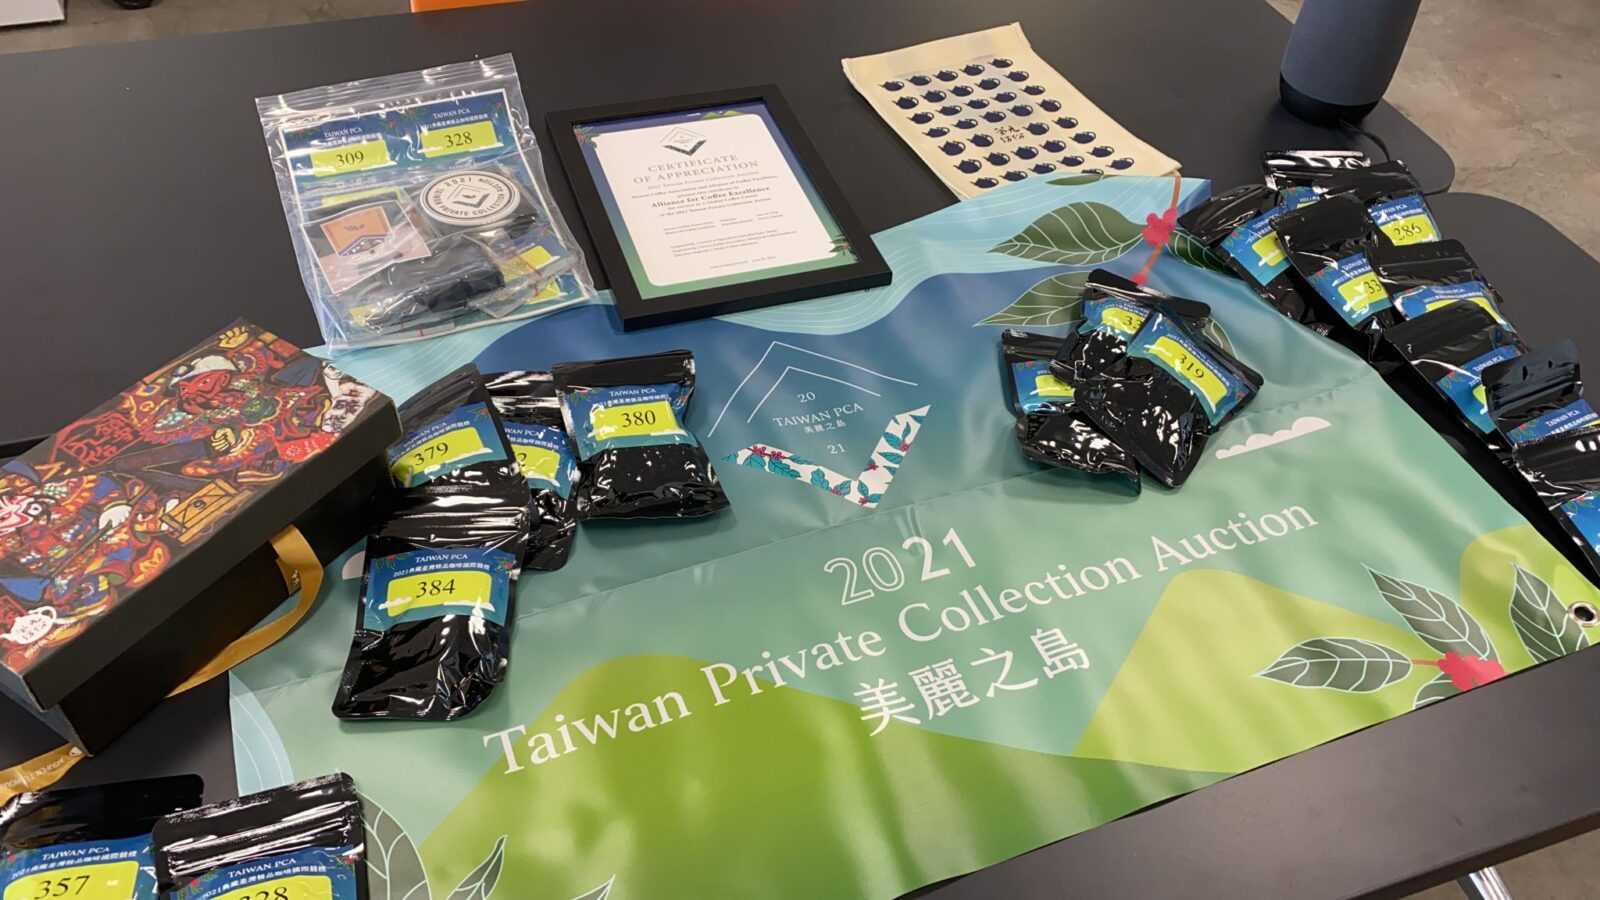 Taiwanese auction